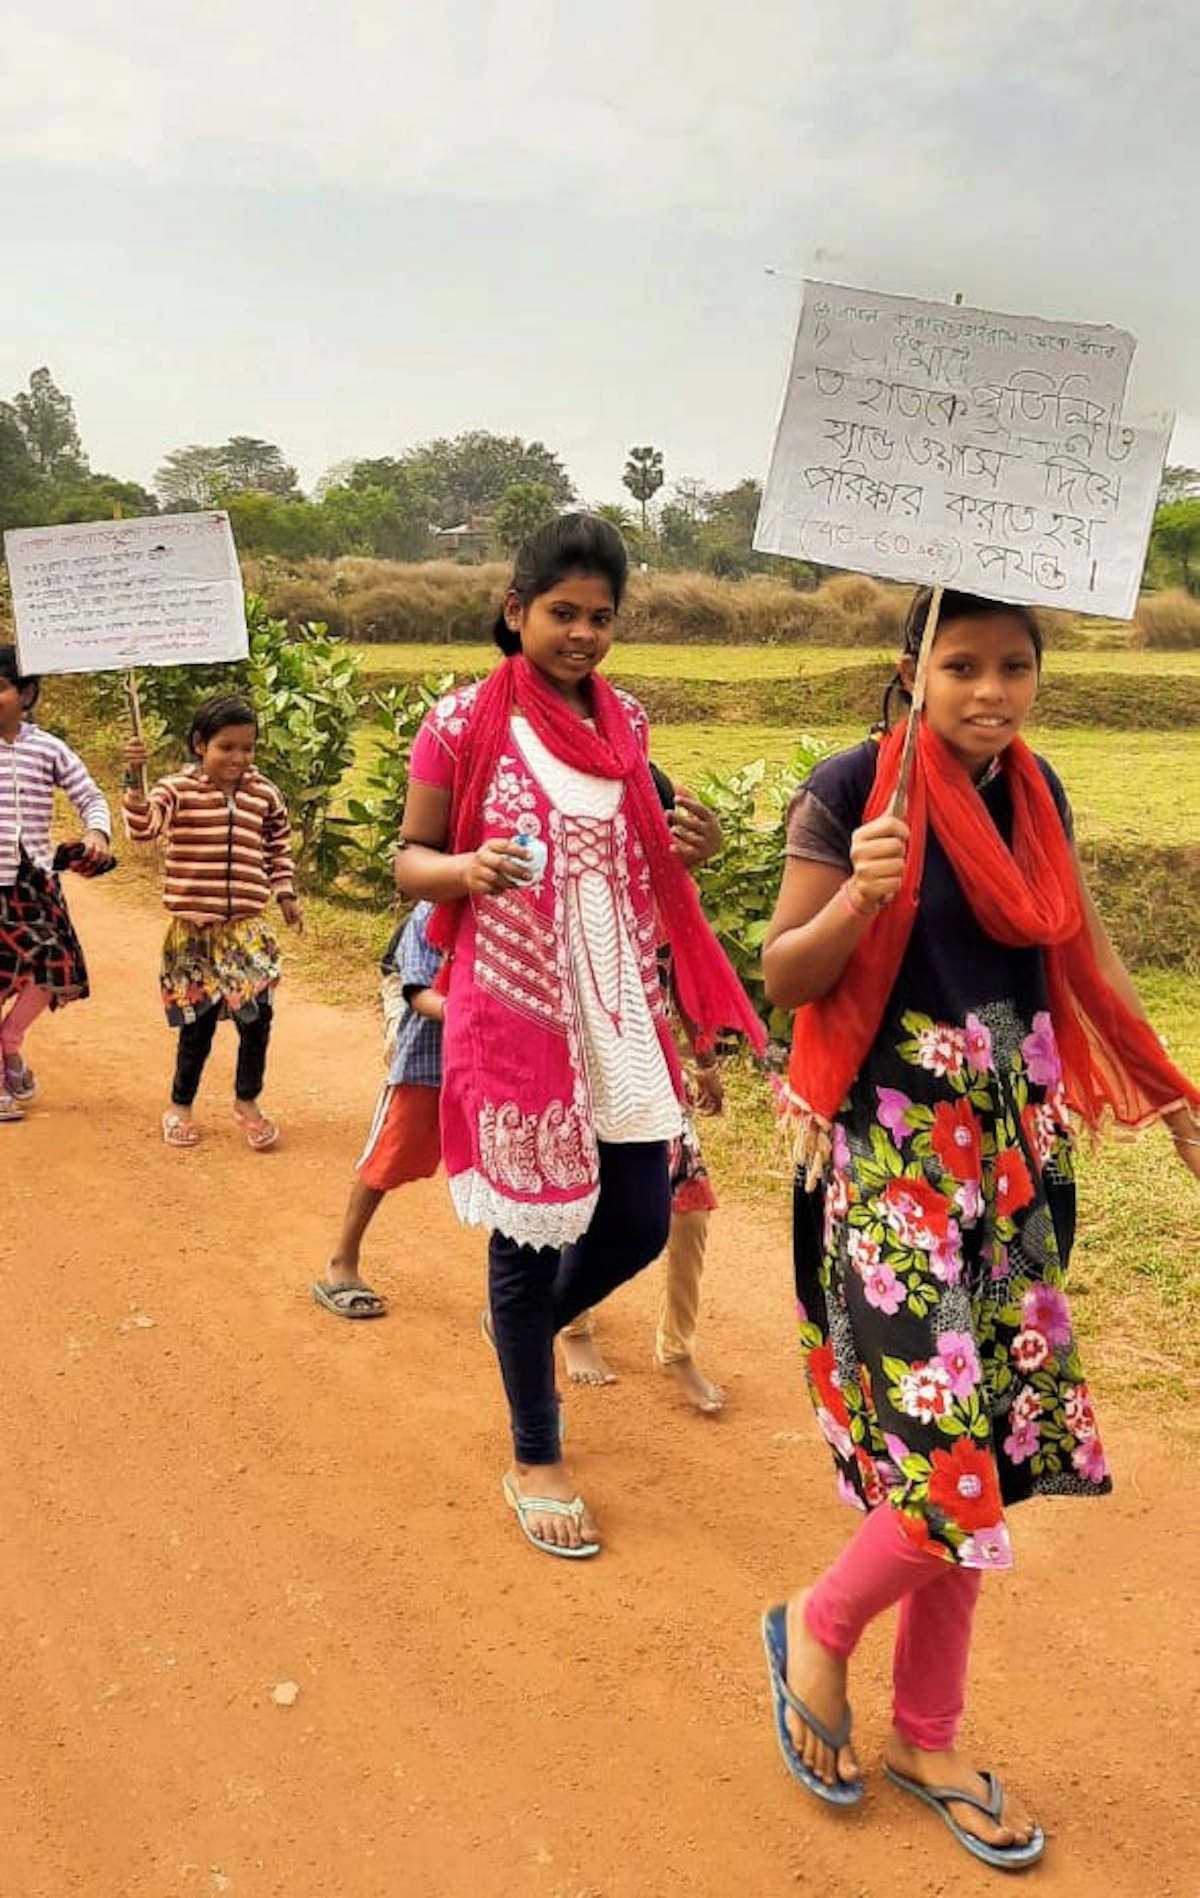 Children from India’s Baha’i community took on a project to raise awareness of the coronavirus disease (COVID-19) and encourage sanitary practice well before their area was affected.